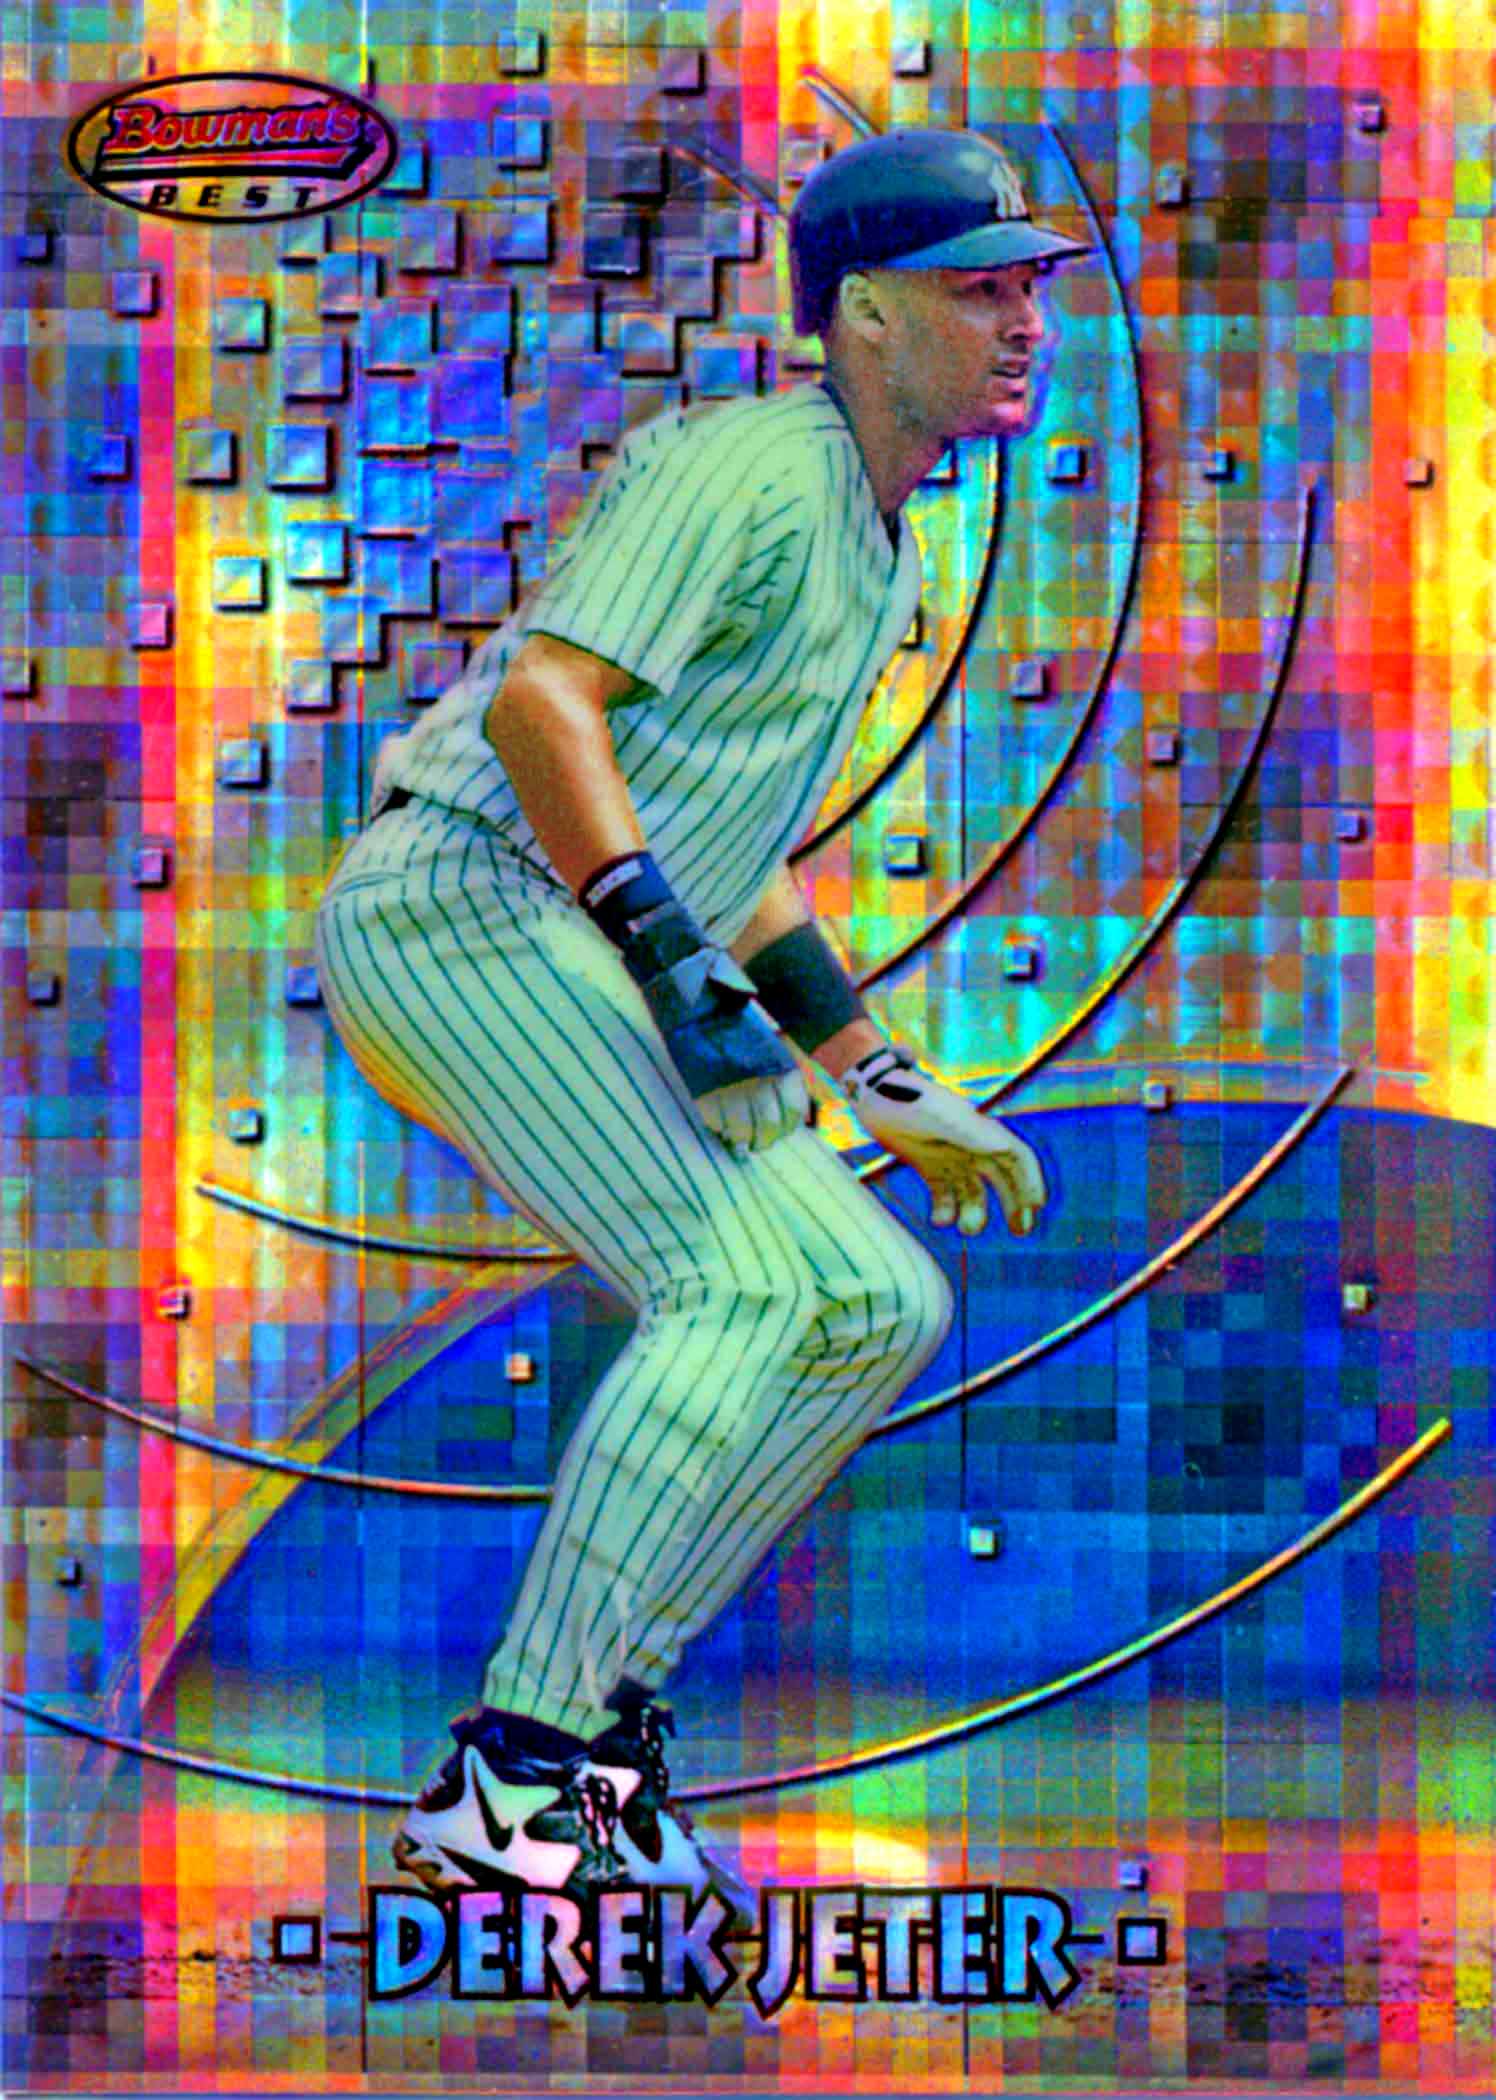 1997 Bowman's Best Preview Atomic Refractor